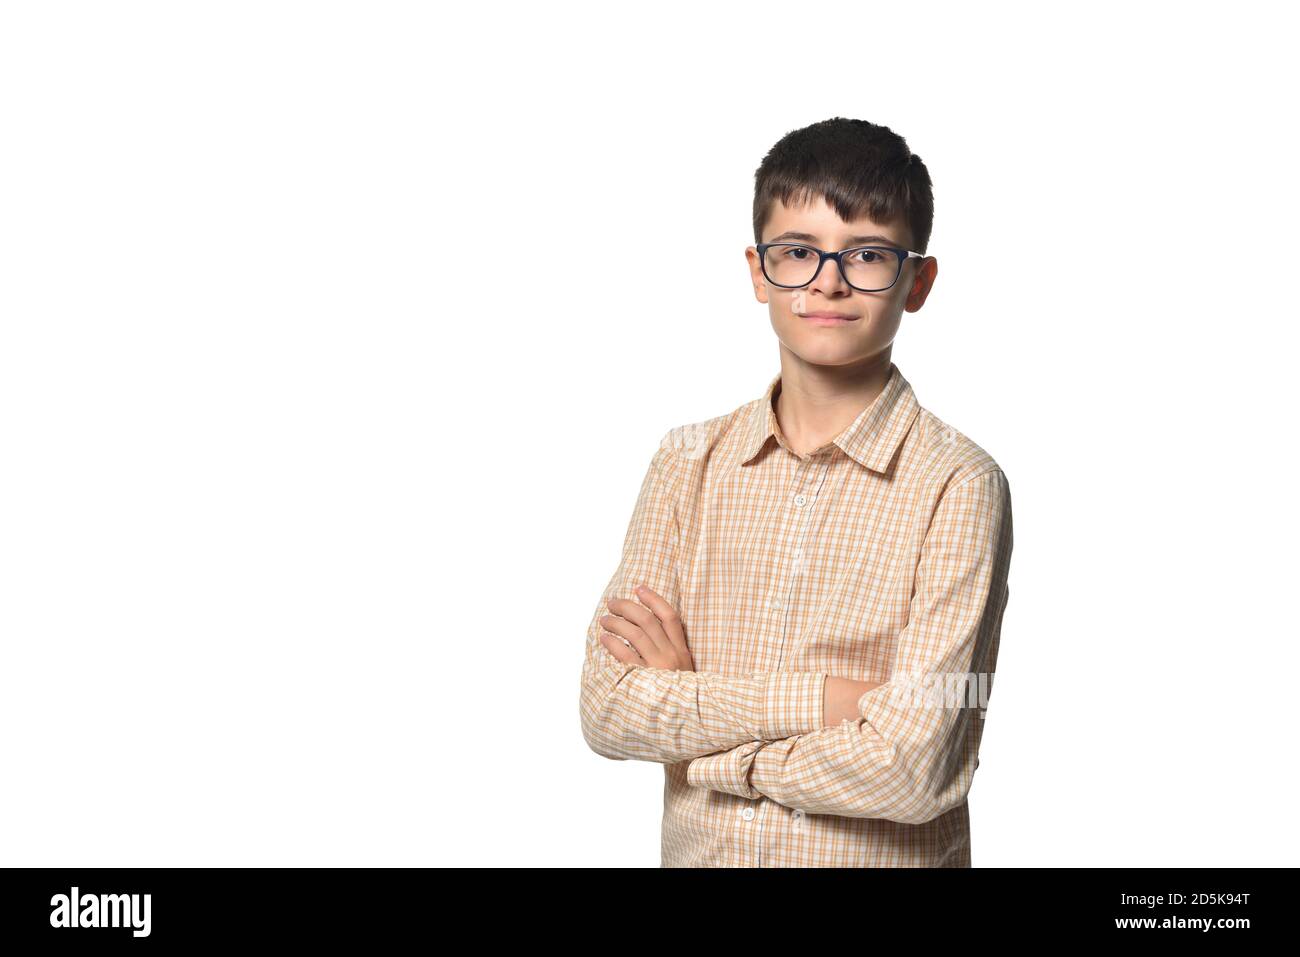 Portrait of a school-age boy confidently looking at the camera and smiling Stock Photo